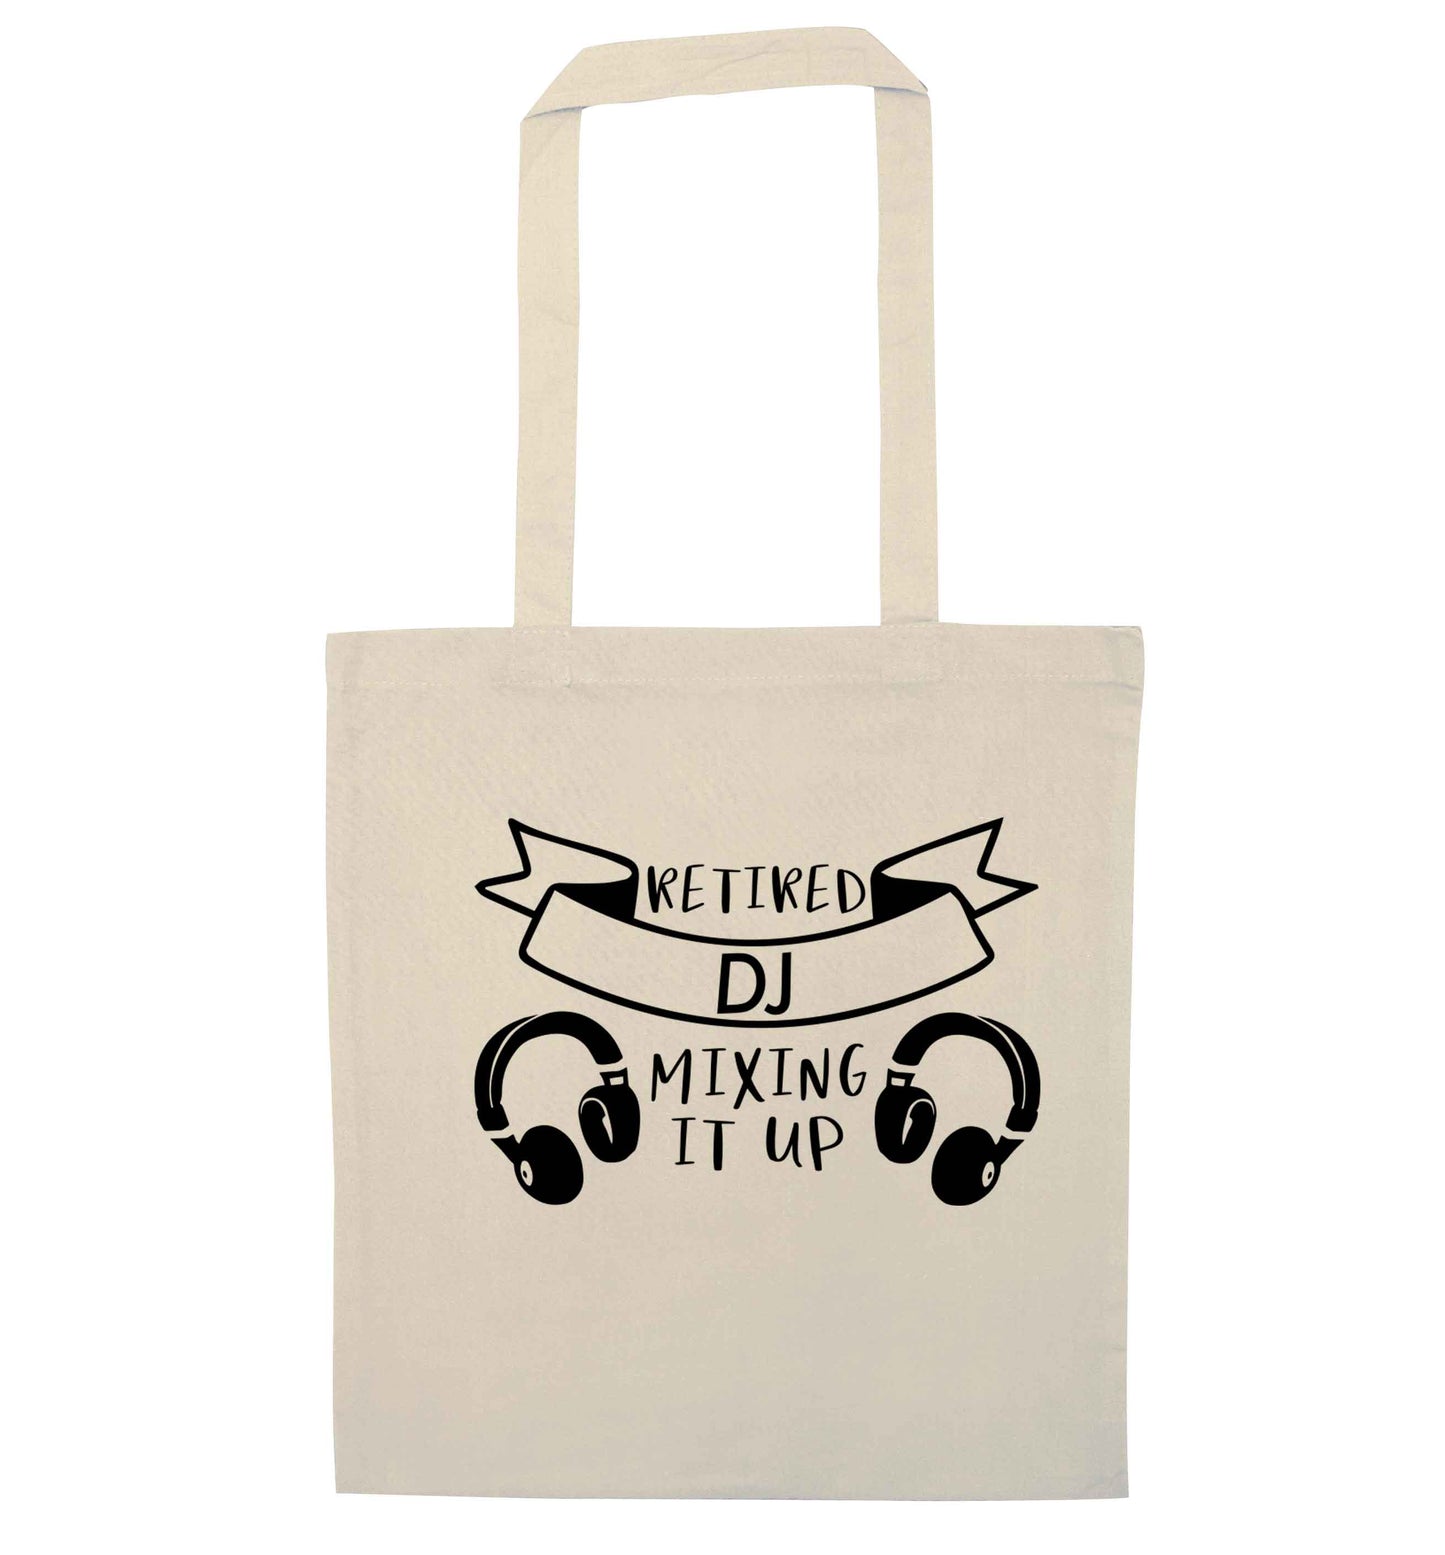 Retired DJ mixing it up natural tote bag